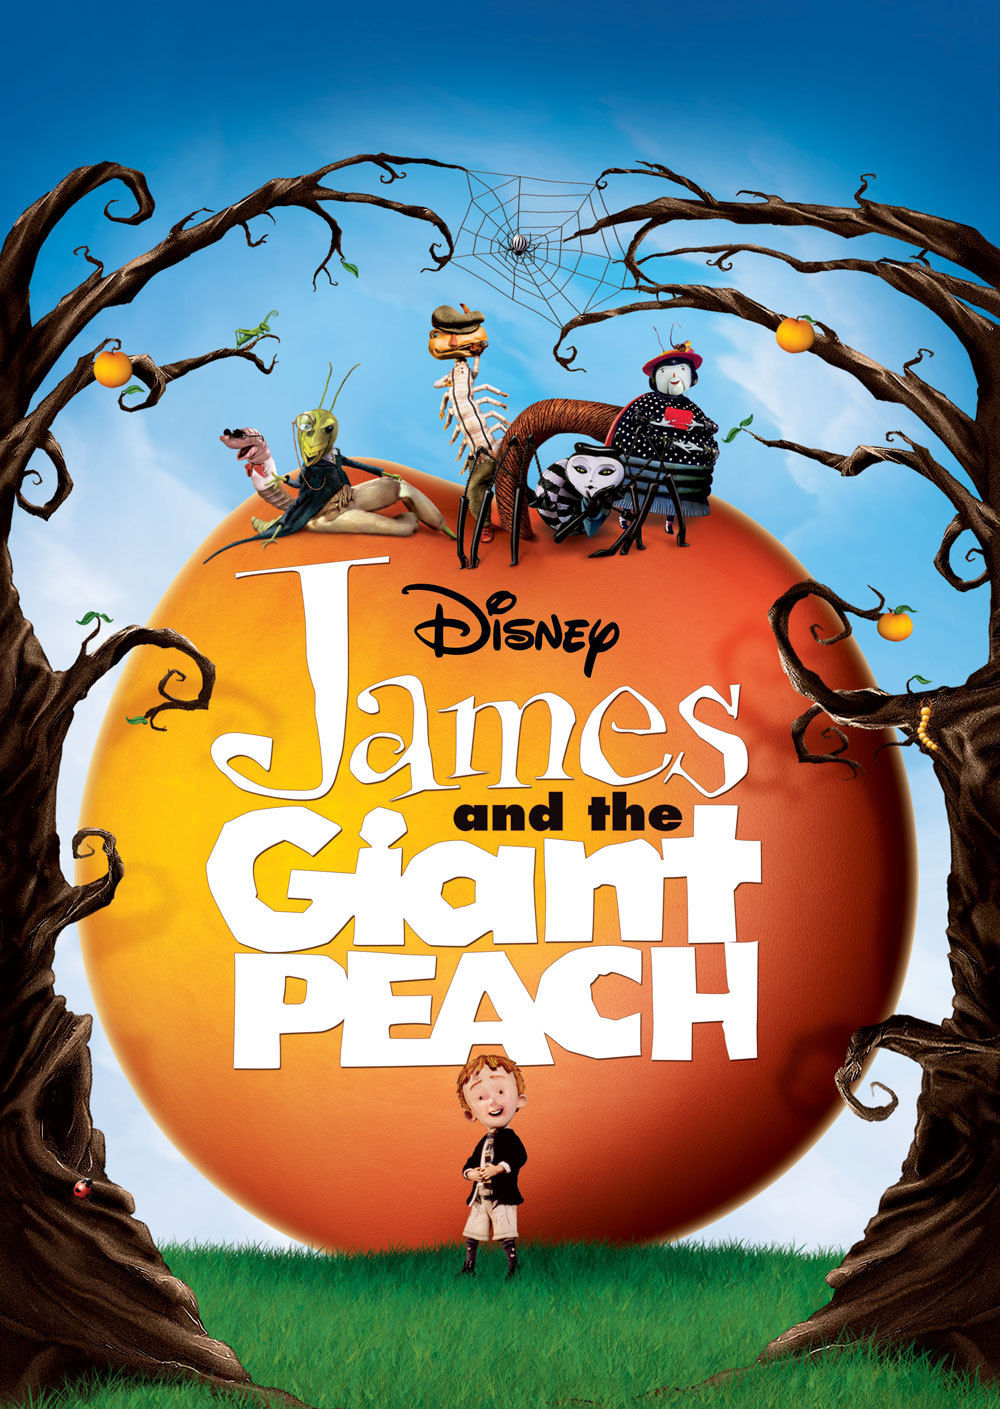 James And The Giant Peach HD wallpapers, Desktop wallpaper - most viewed